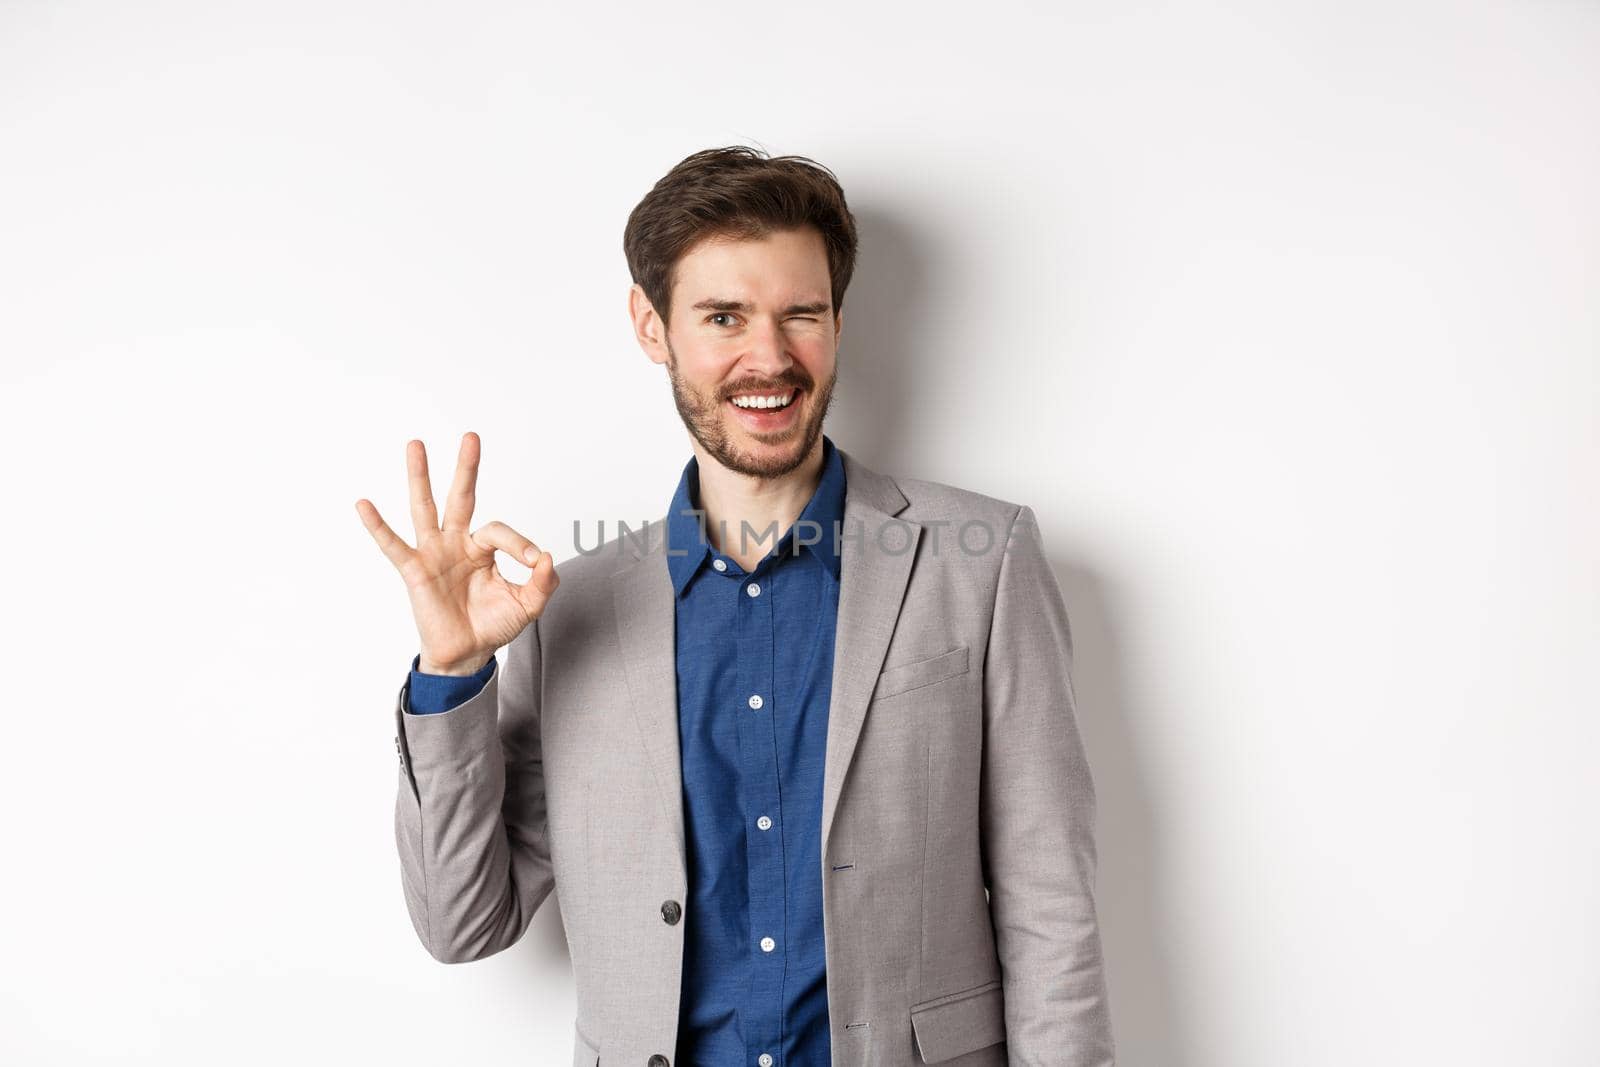 Everything okay. Cheerful businessman in suit winking and showing OK sign, smiling assertive, guarantee quality, praise good choice, standing on white background.